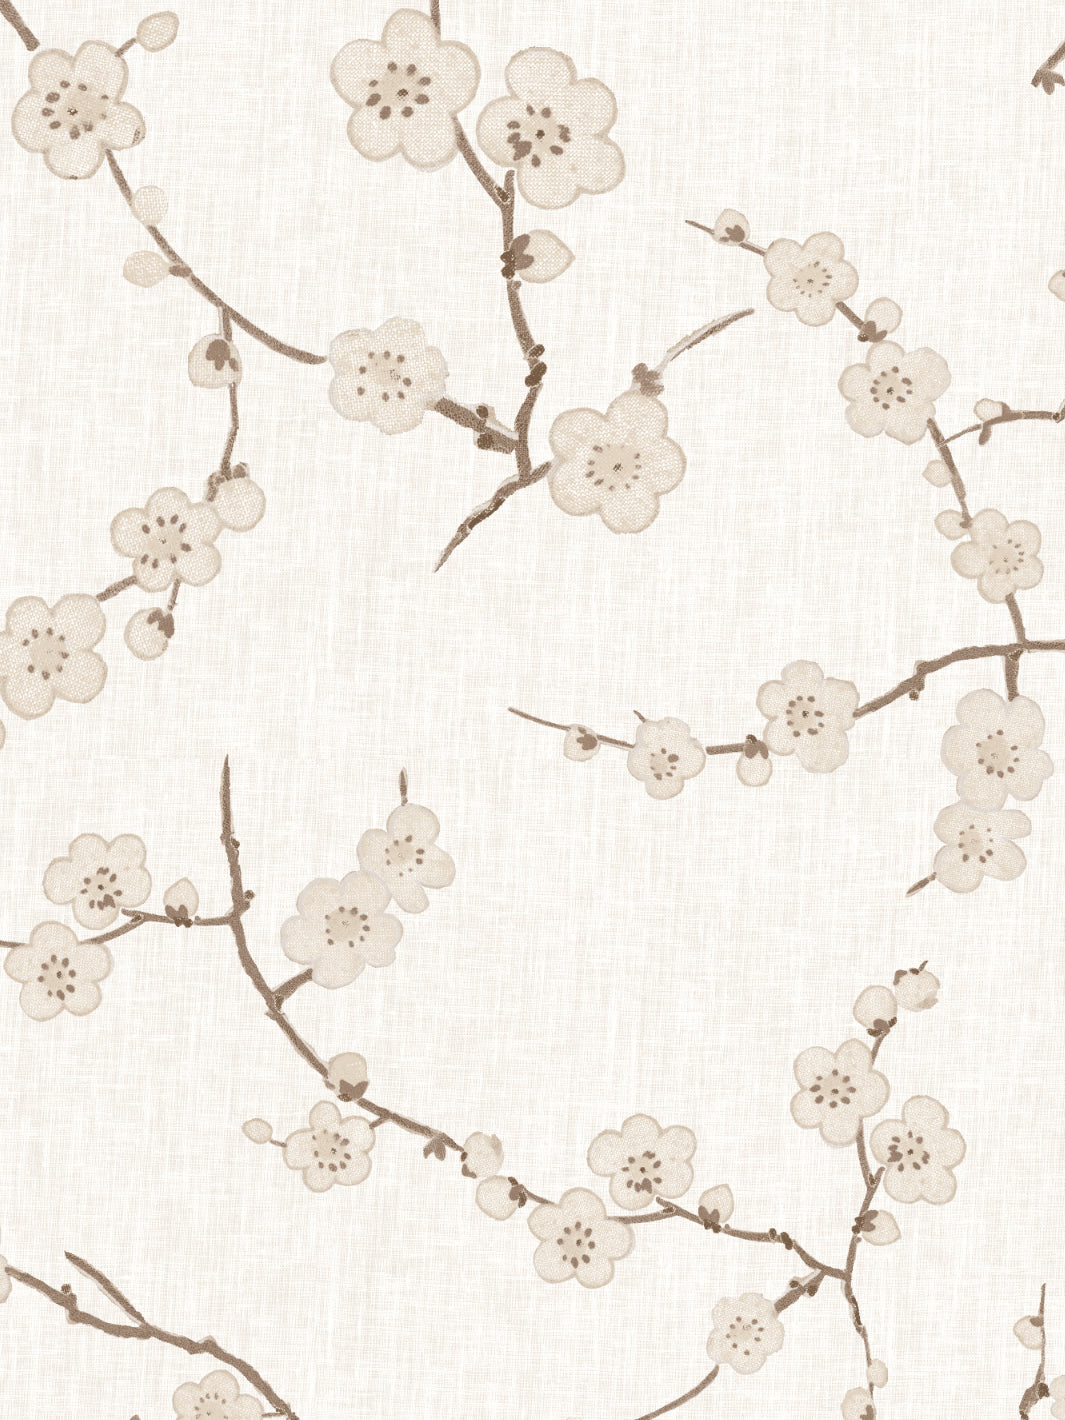 'Cherry Blossom' Wallpaper by Nathan Turner - Neutral